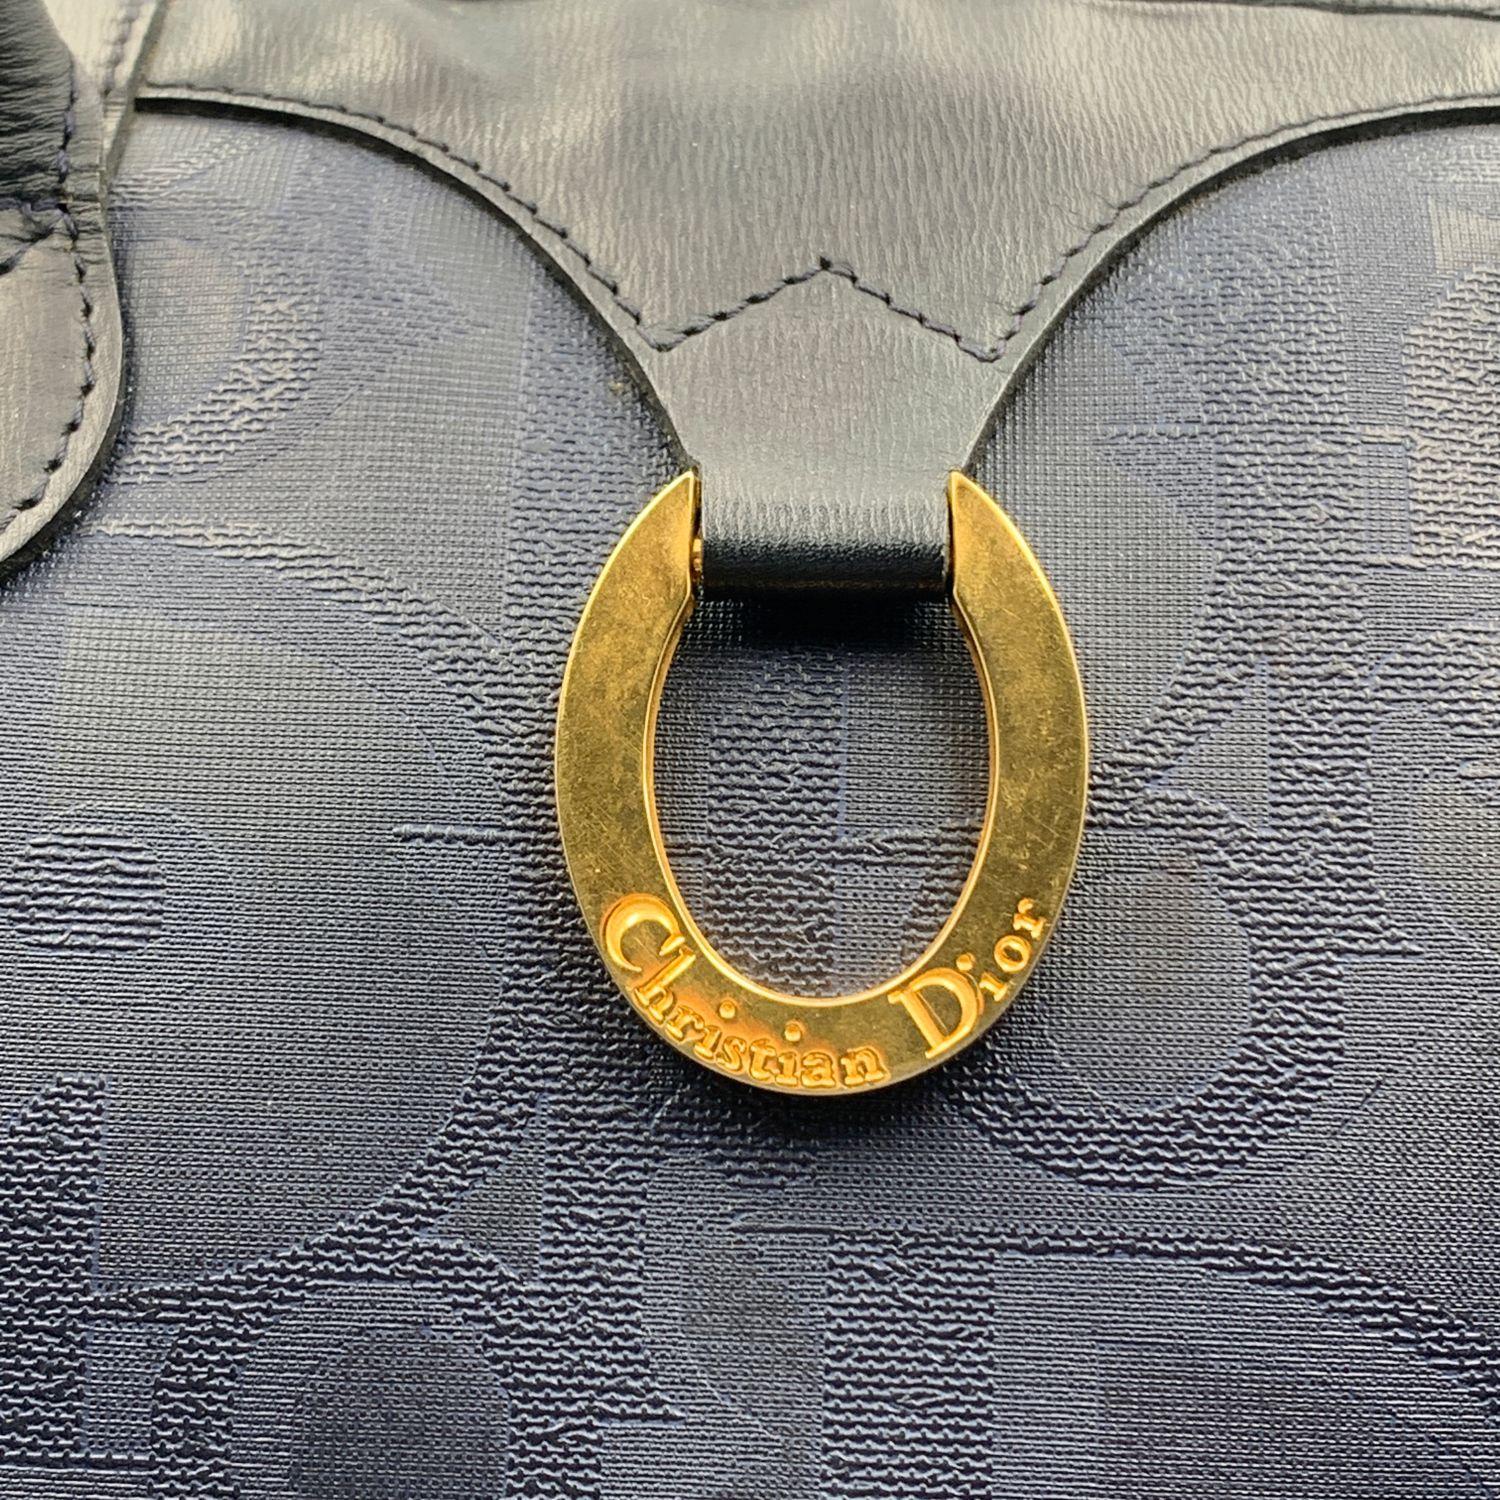 Unisex large vintage weekender duffle bag by Christian Dior. Blue color. Big Dior monogram pattern. Gold metal ring with Dior signature on the front. Top leather handles, no strap. 'Christian Dior, Made in France' 'logo/tag on the inside. Blue